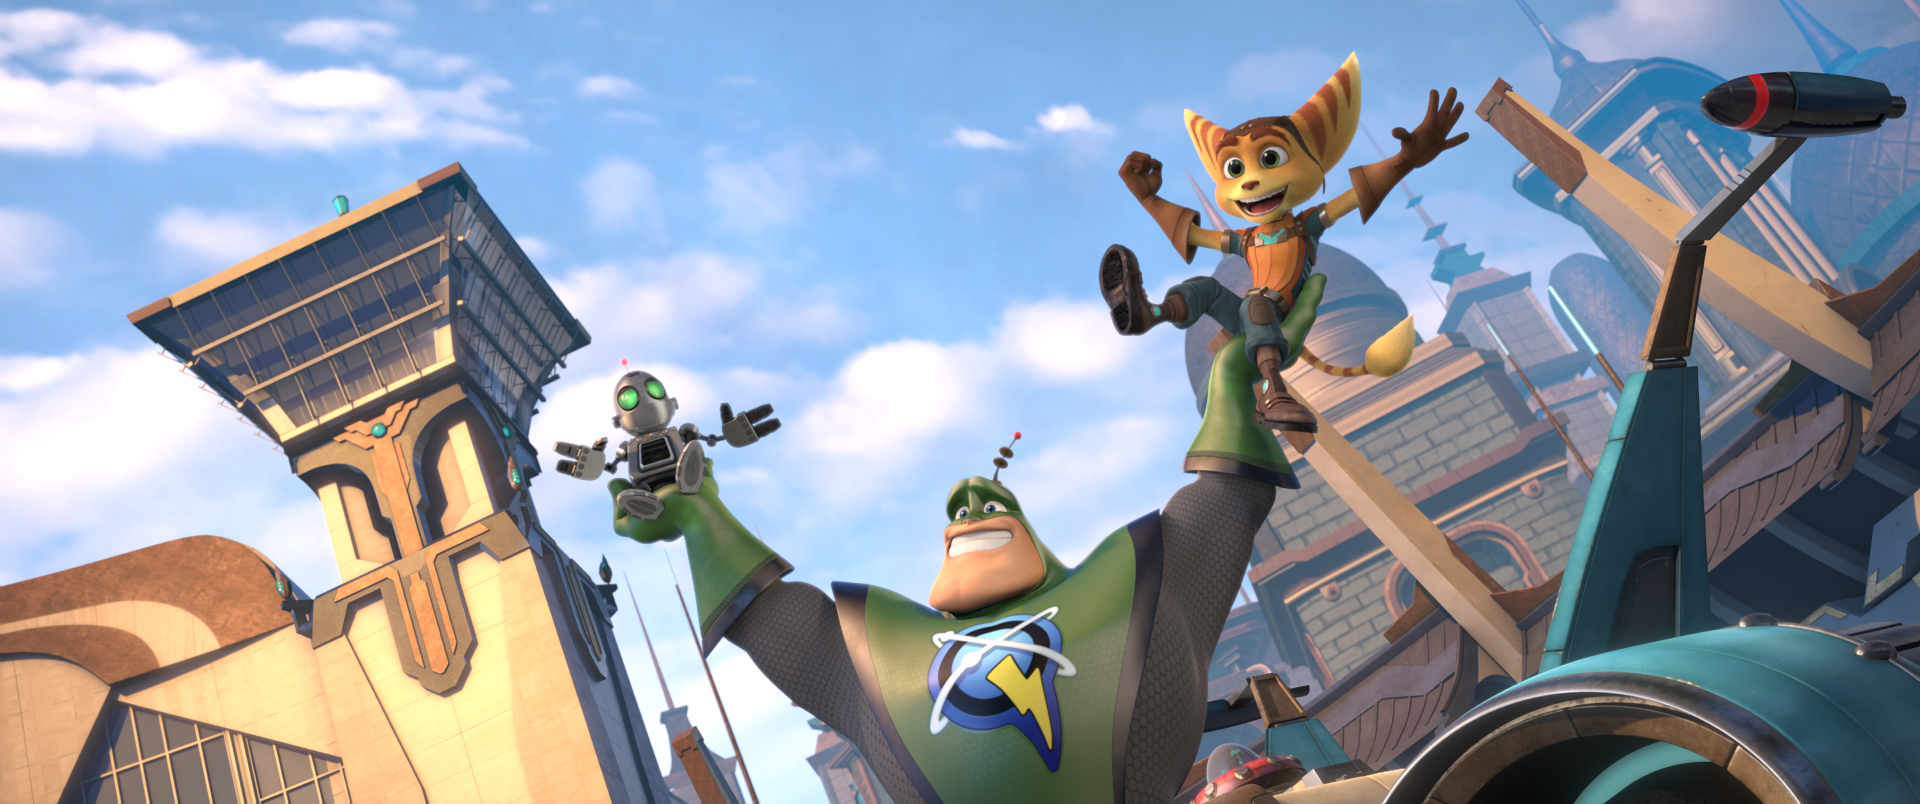 Goofy Slapstick Replaces The Run And Gun Action In The Ratchet Clank Movie Eurogamer Net